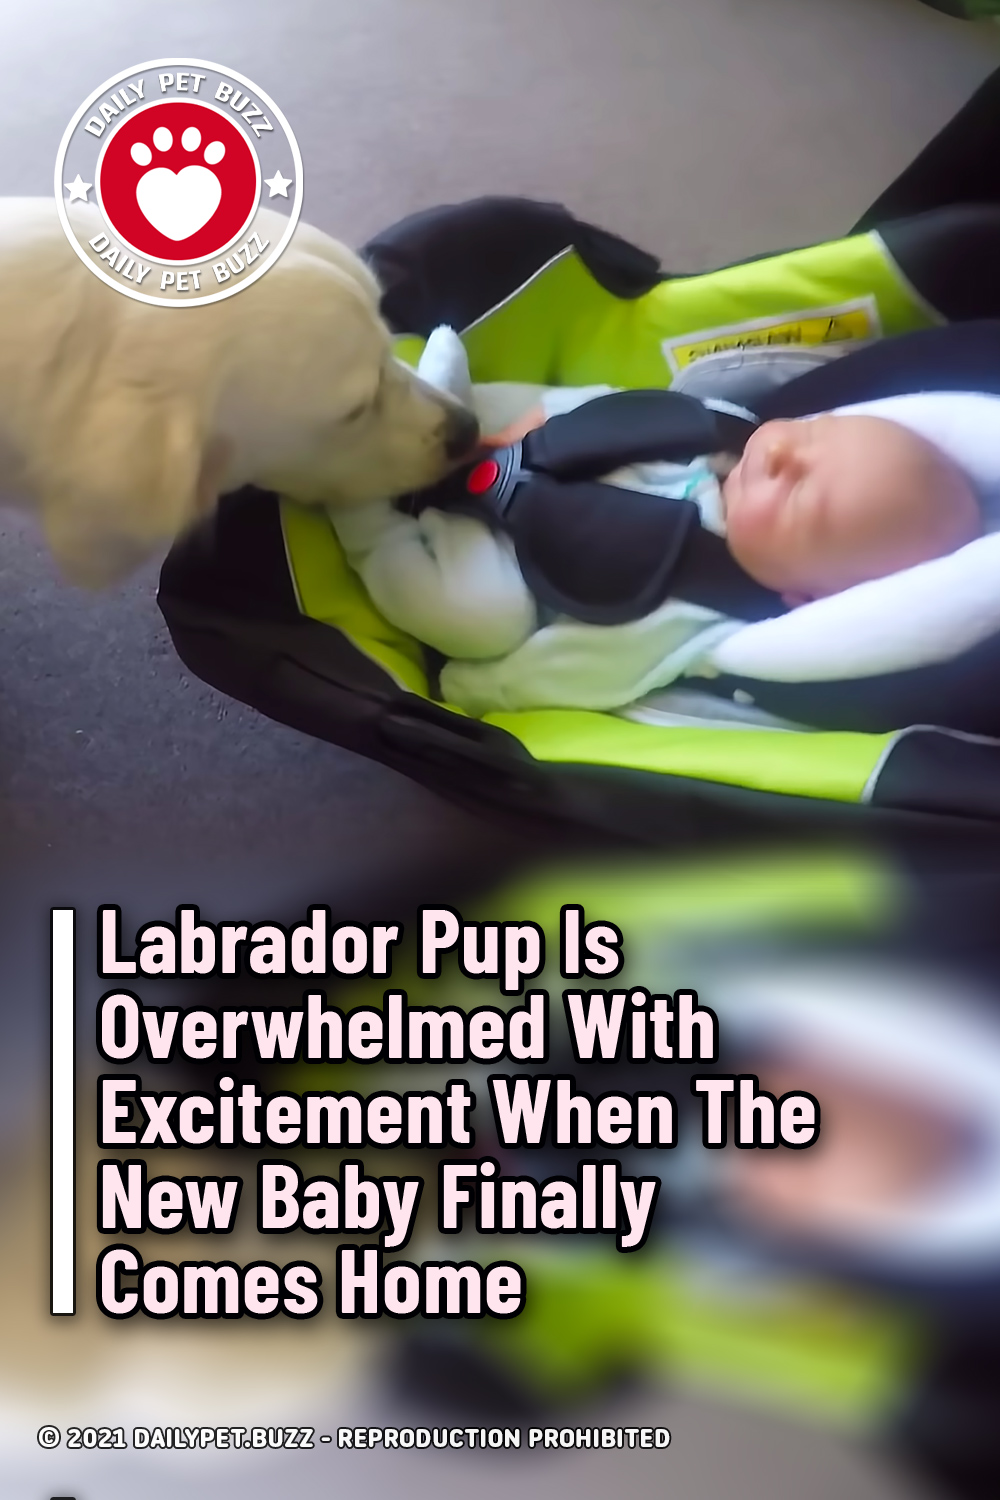 Labrador Pup Is Overwhelmed With Excitement When The New Baby Finally Comes Home